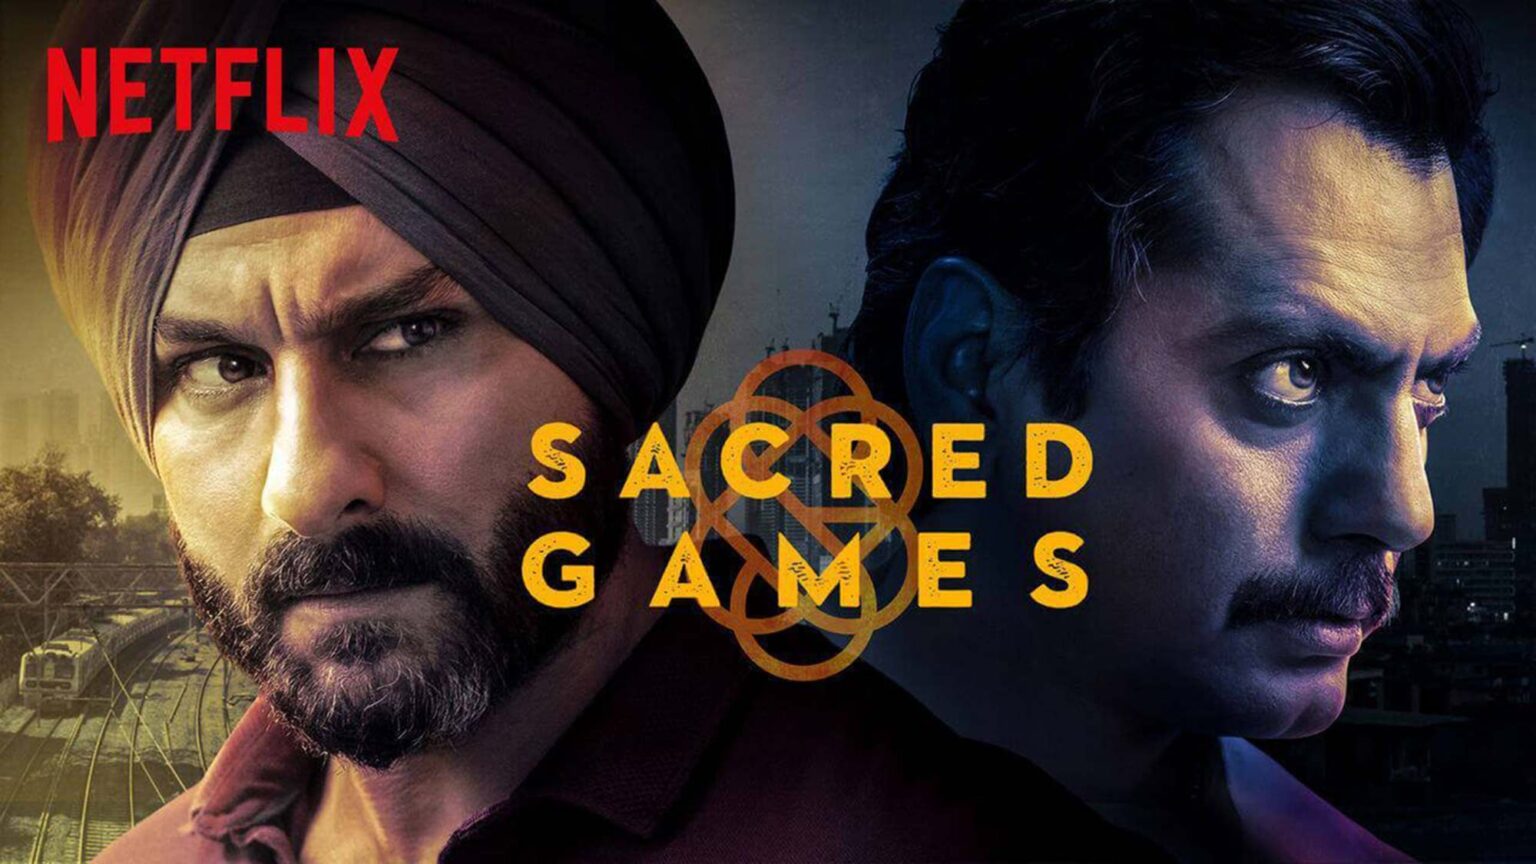 Looking to watch more Indian content besides Bollywood movies? 'Sacred Games' is just the series for you to binge watch.